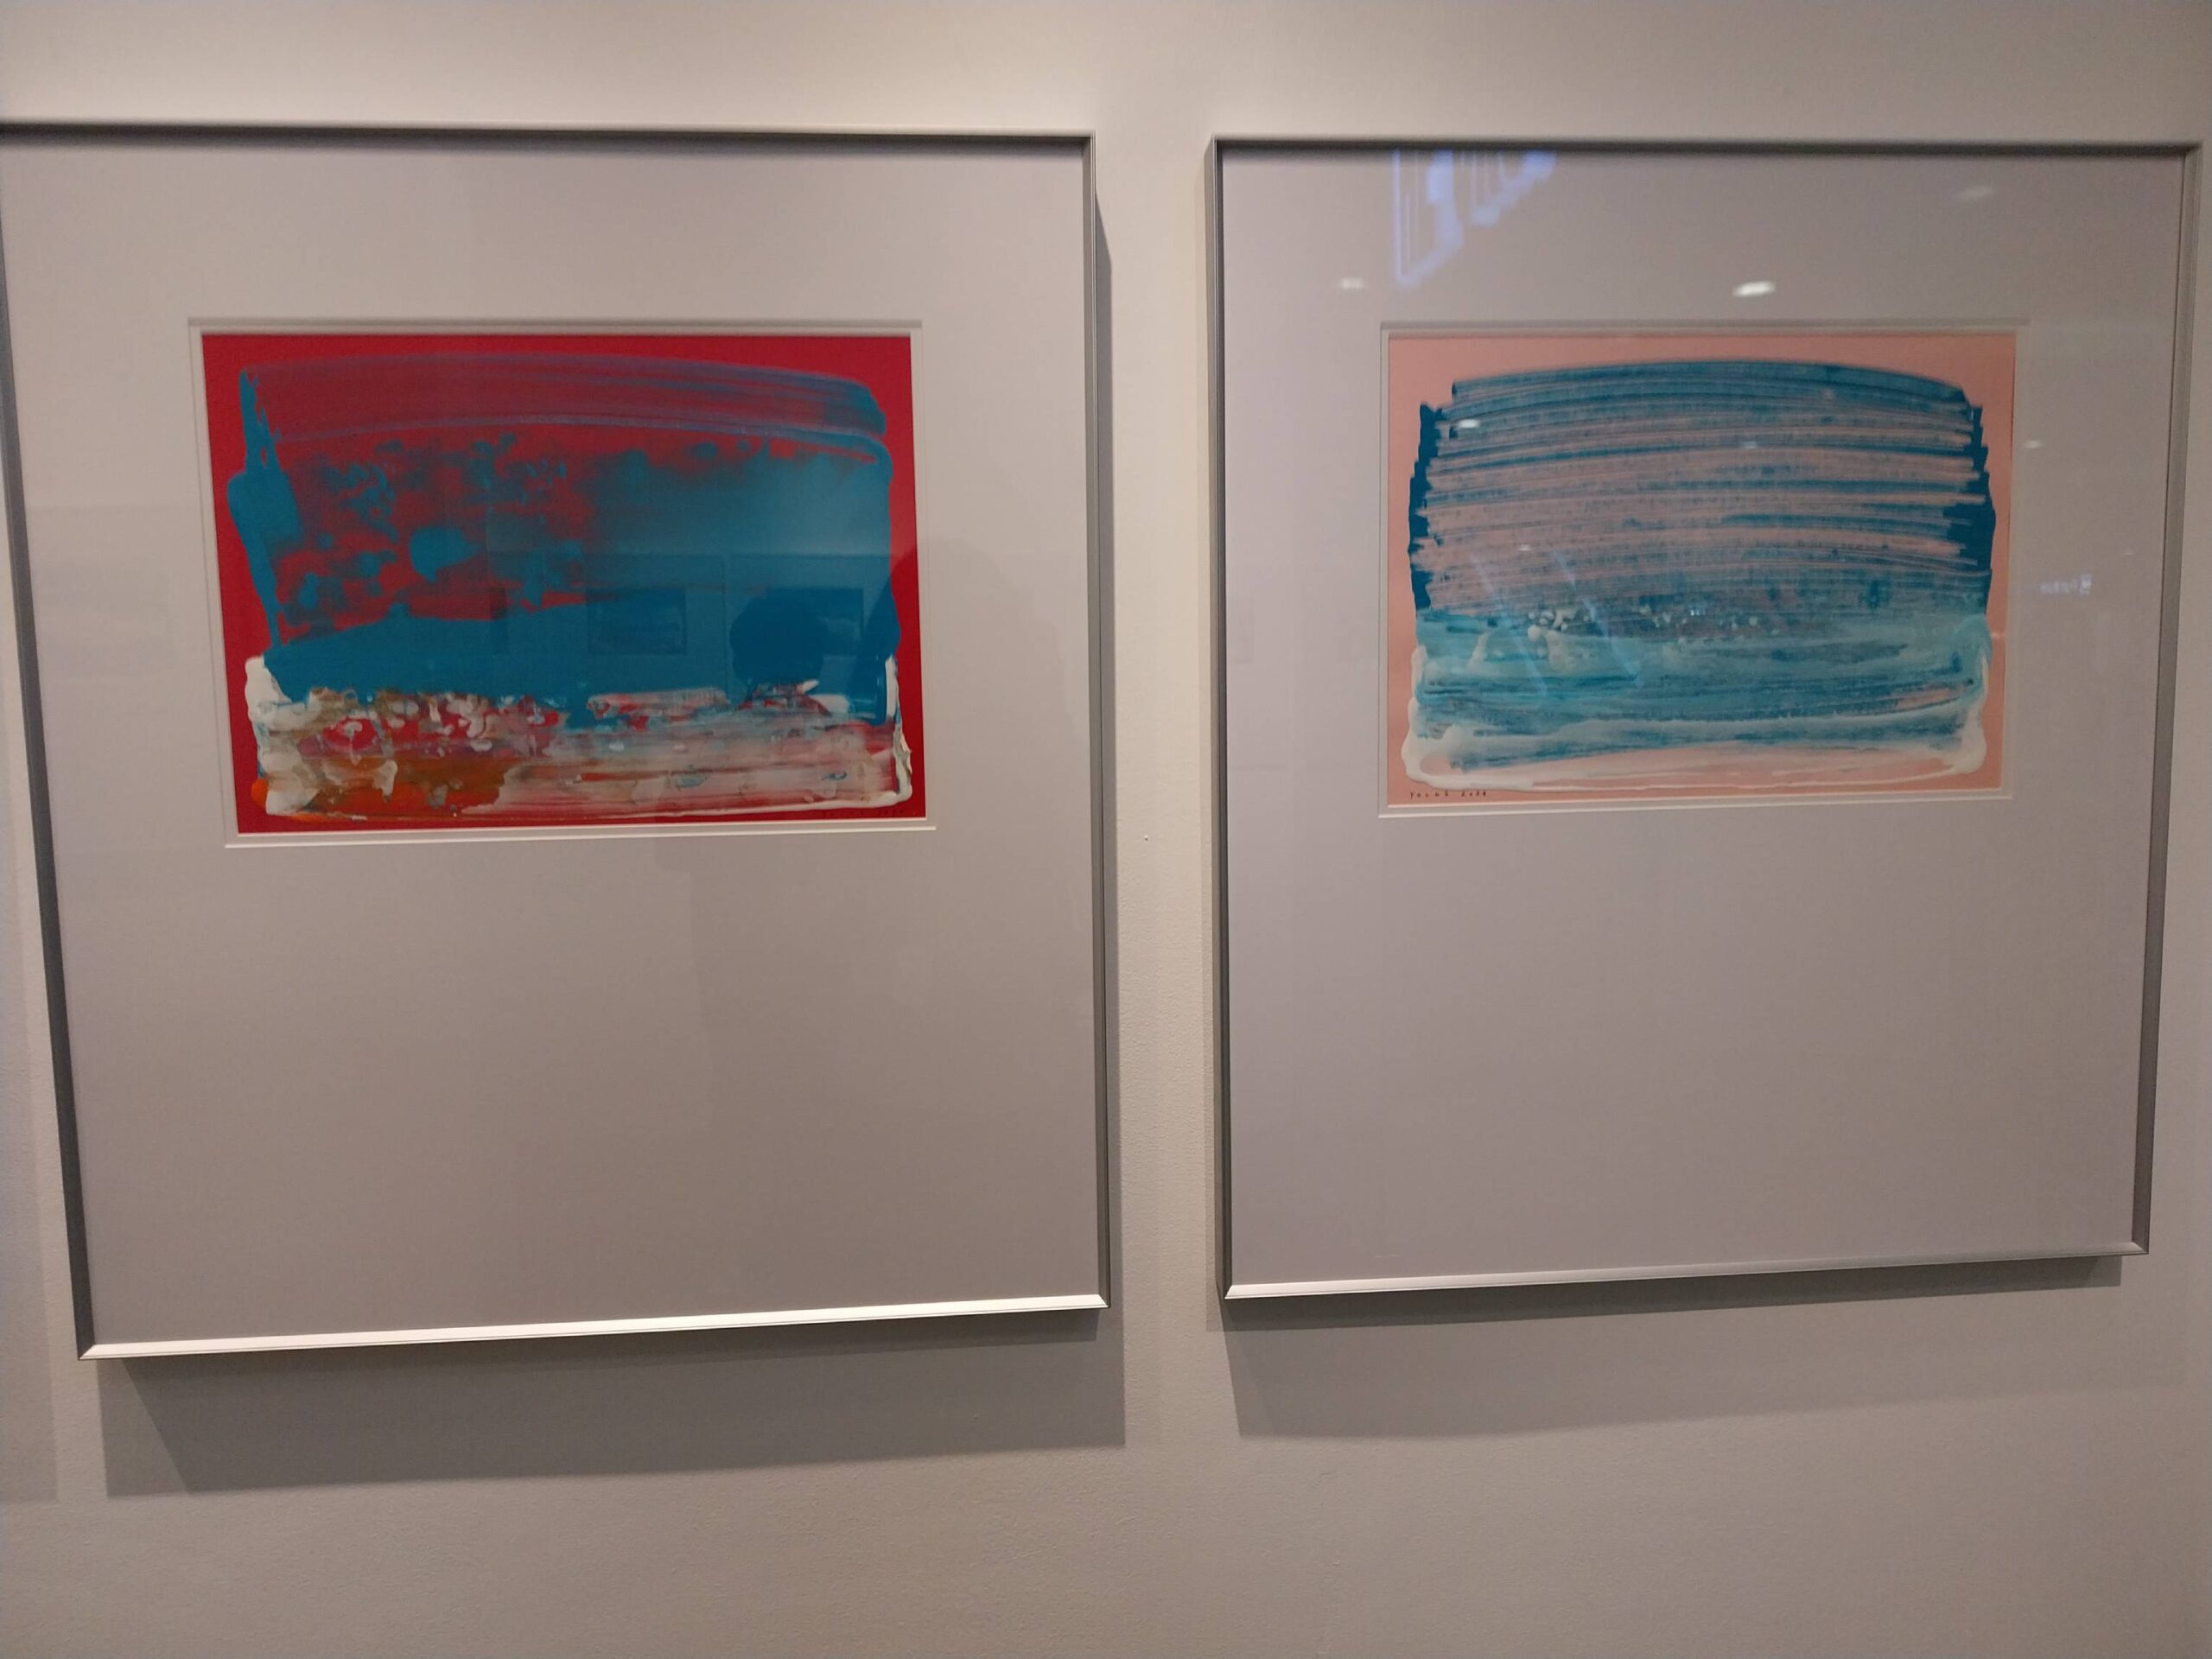 Abstract paintings that were featured in the exhibit. Photo by Elle Yap.